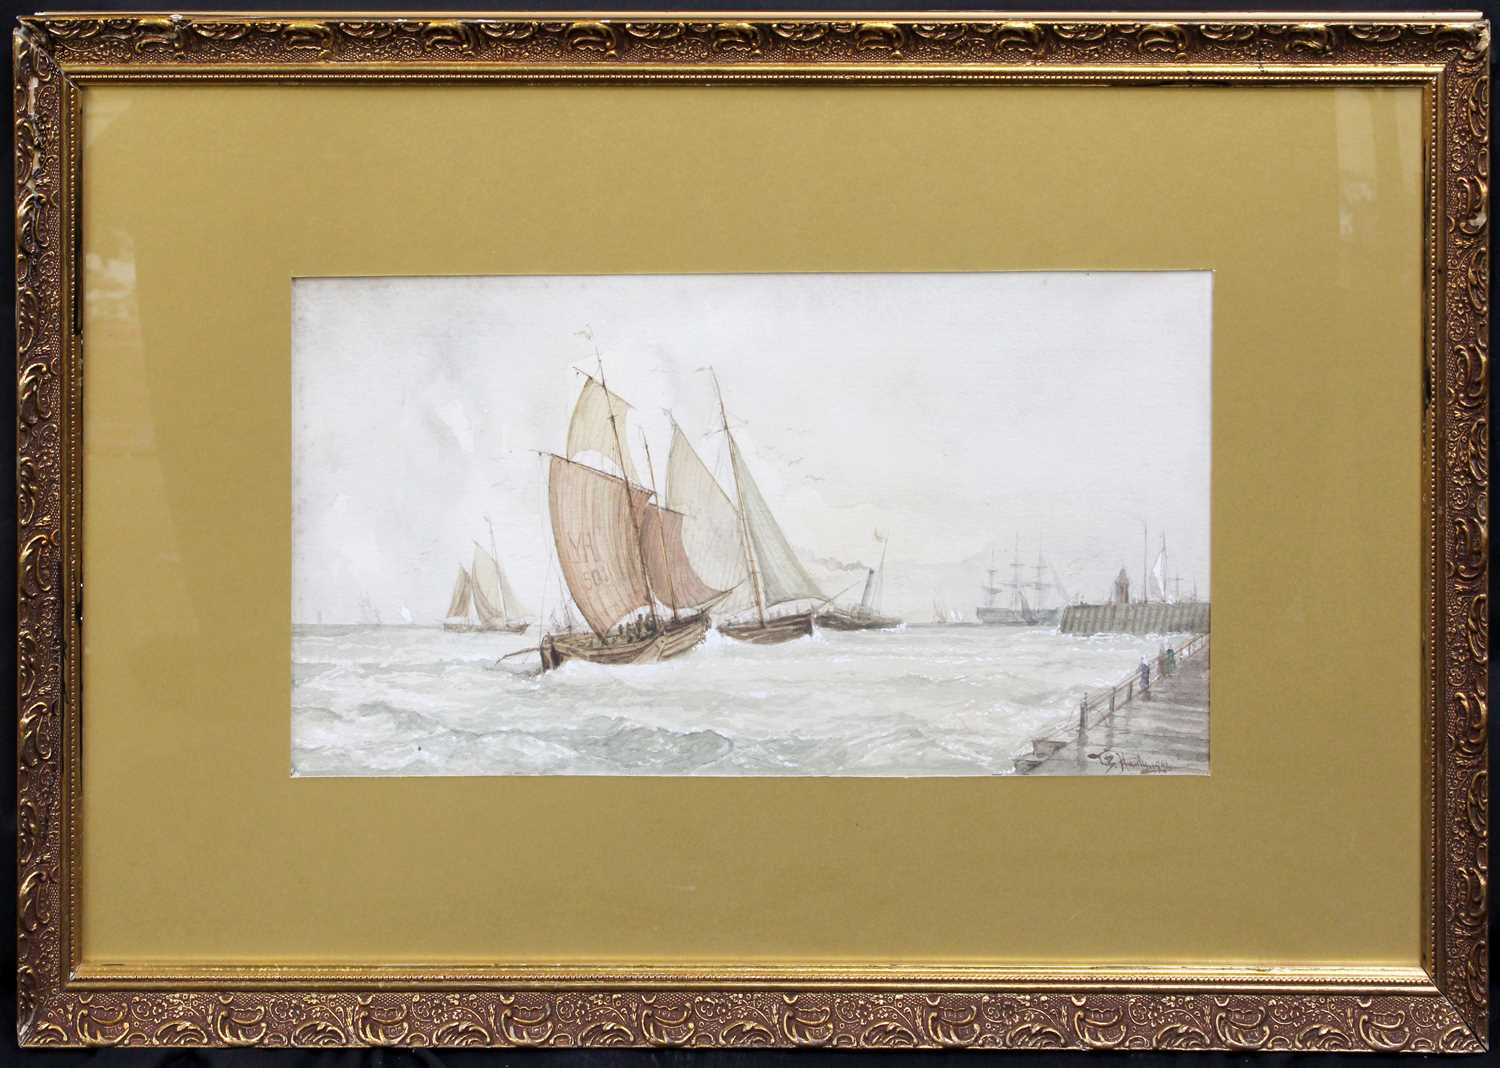 Attributed to Thomas Bush Hardy (1842-1897) Seascape Signed and dated 18?6, watercolour heightened - Image 2 of 2